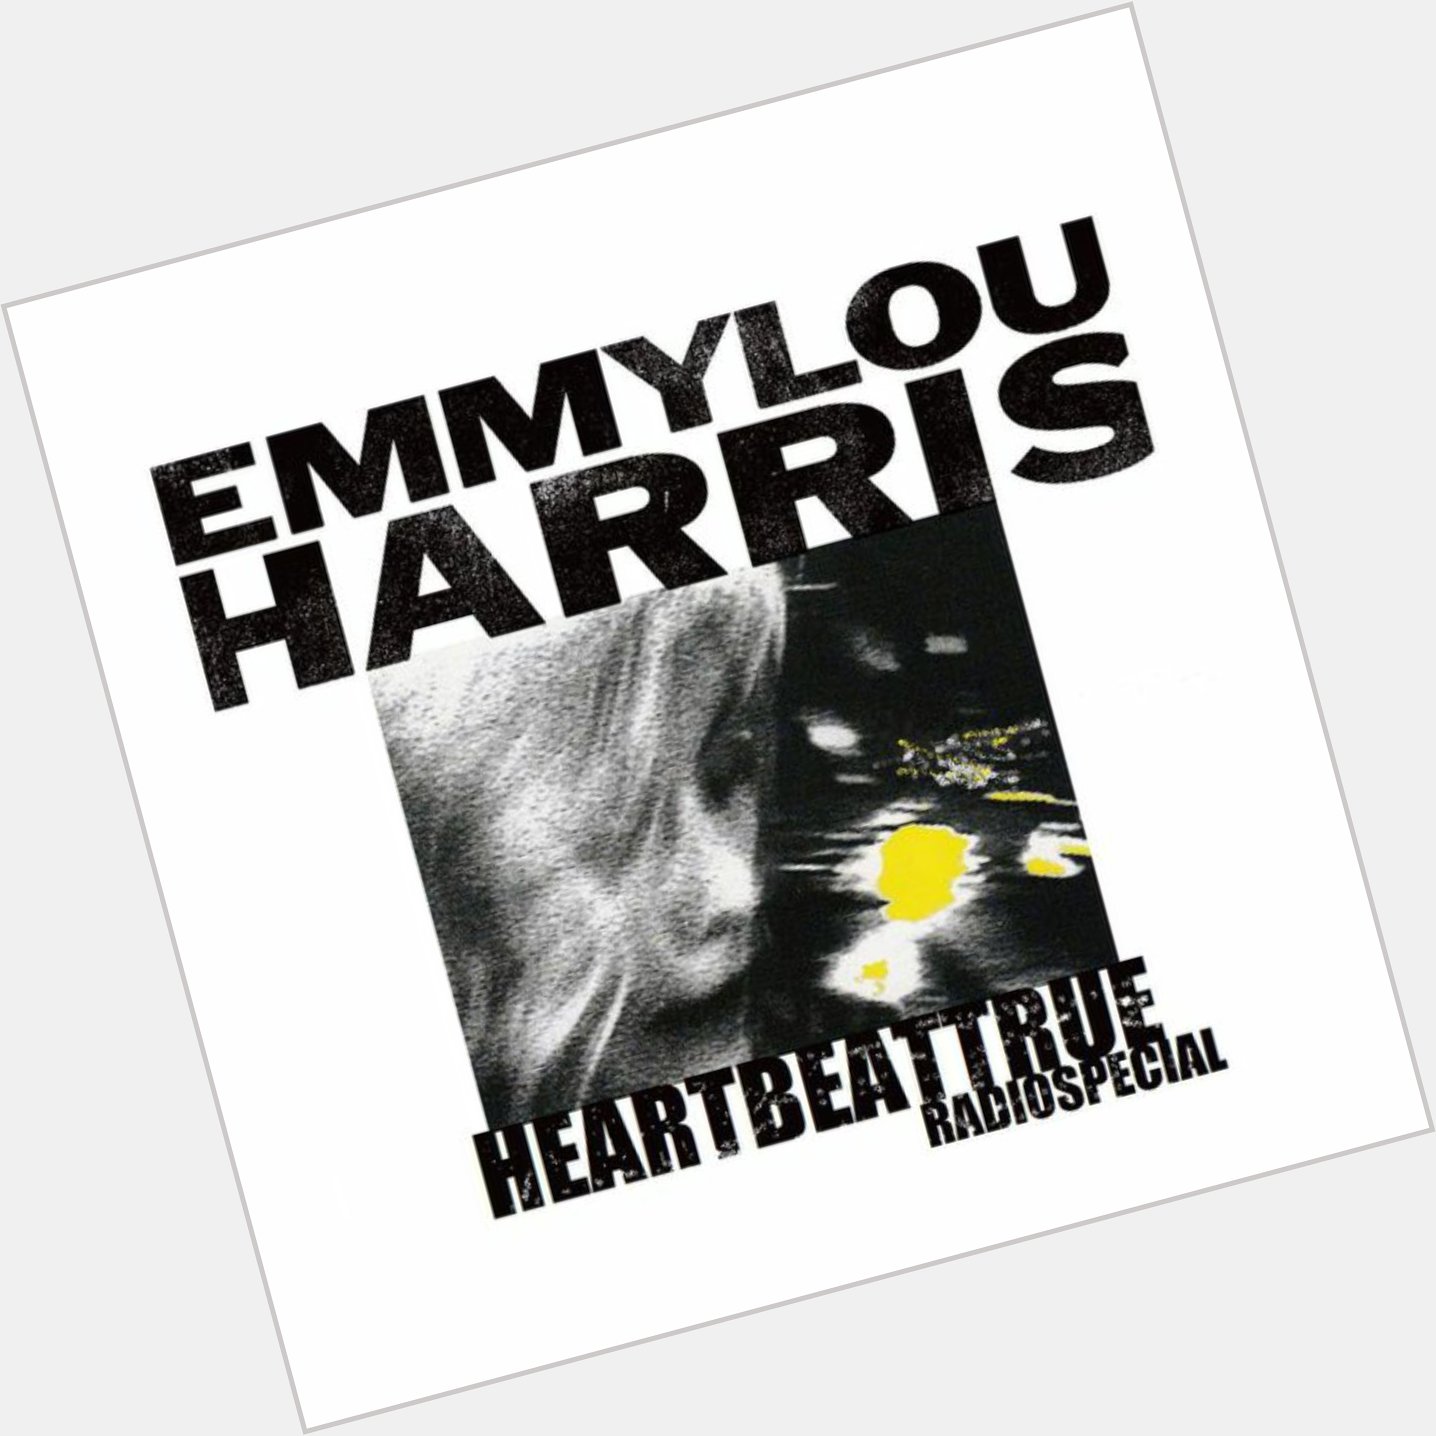 Happy Birthday EMMYLOU.
Click our Emmylou Harris Special.
A really good mix.
 